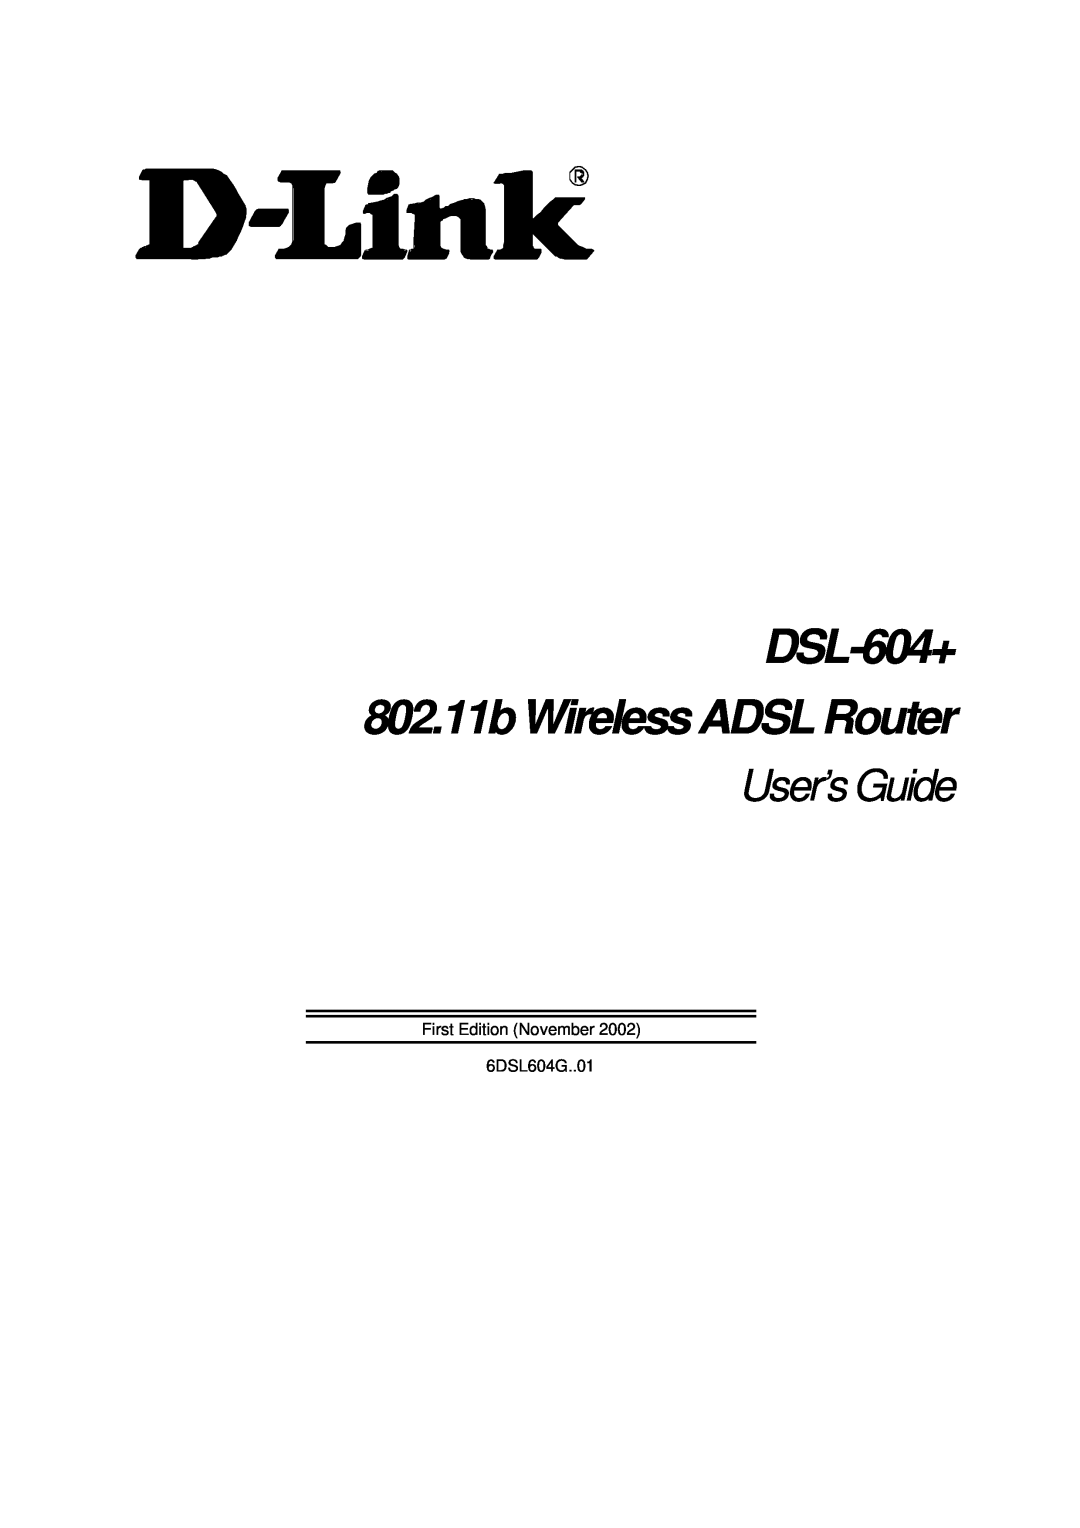 D-Link manual User’s Guide, DSL-604+ 802.11b Wireless ADSL Router 